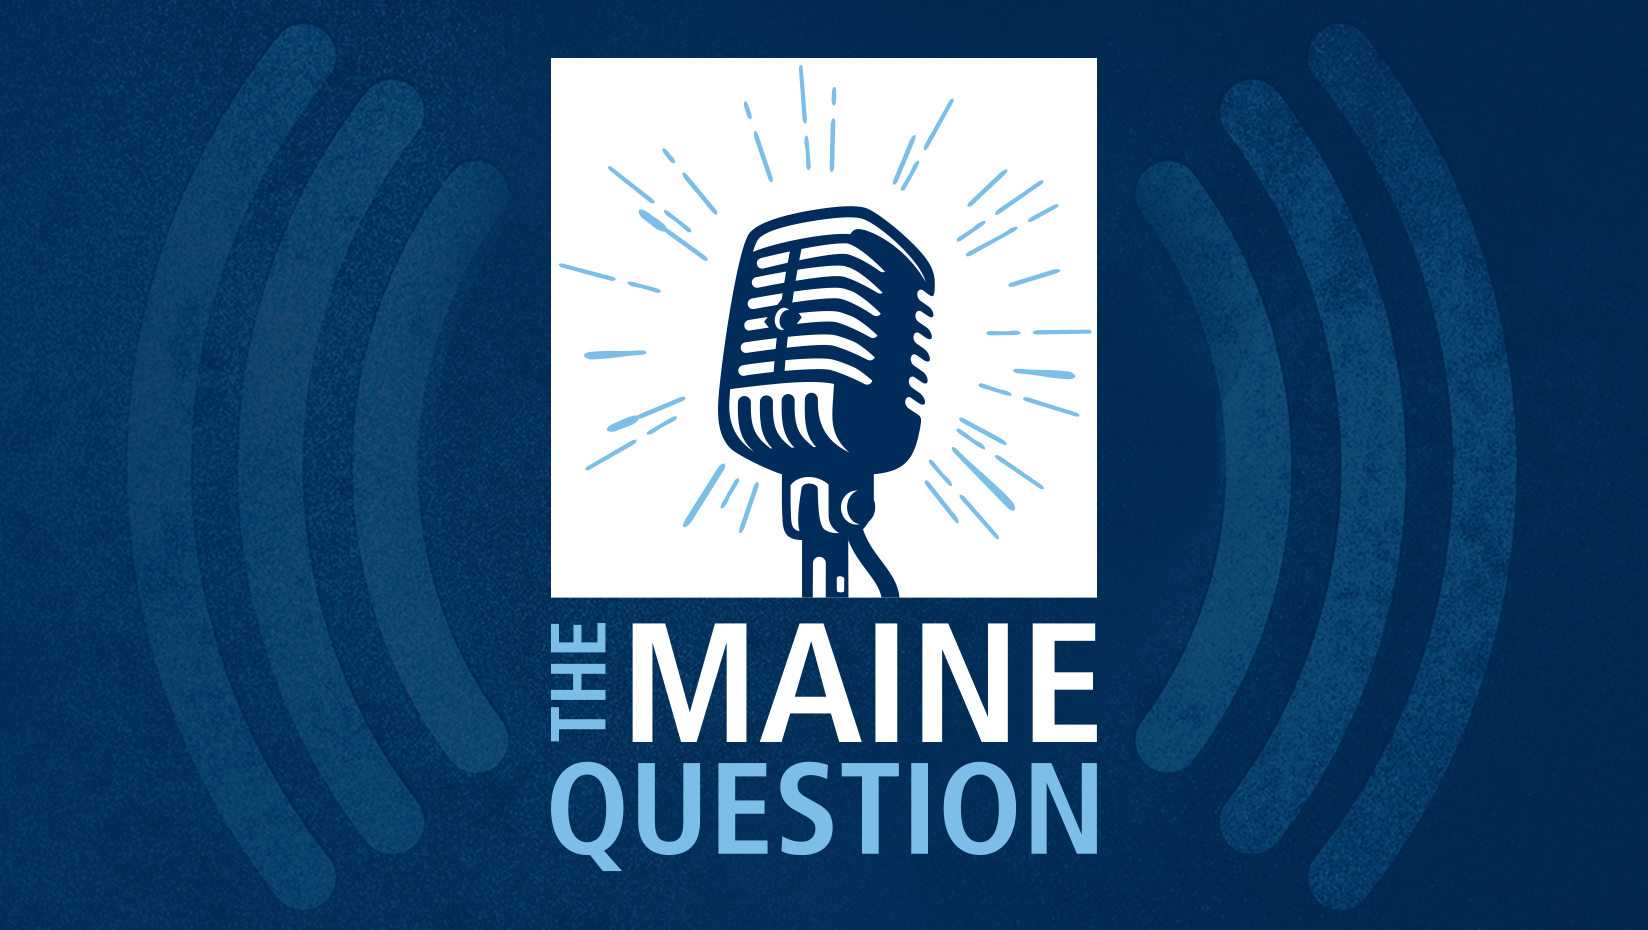 featured image for ‘The Maine Question’ asks what it’s like being an archaeologist